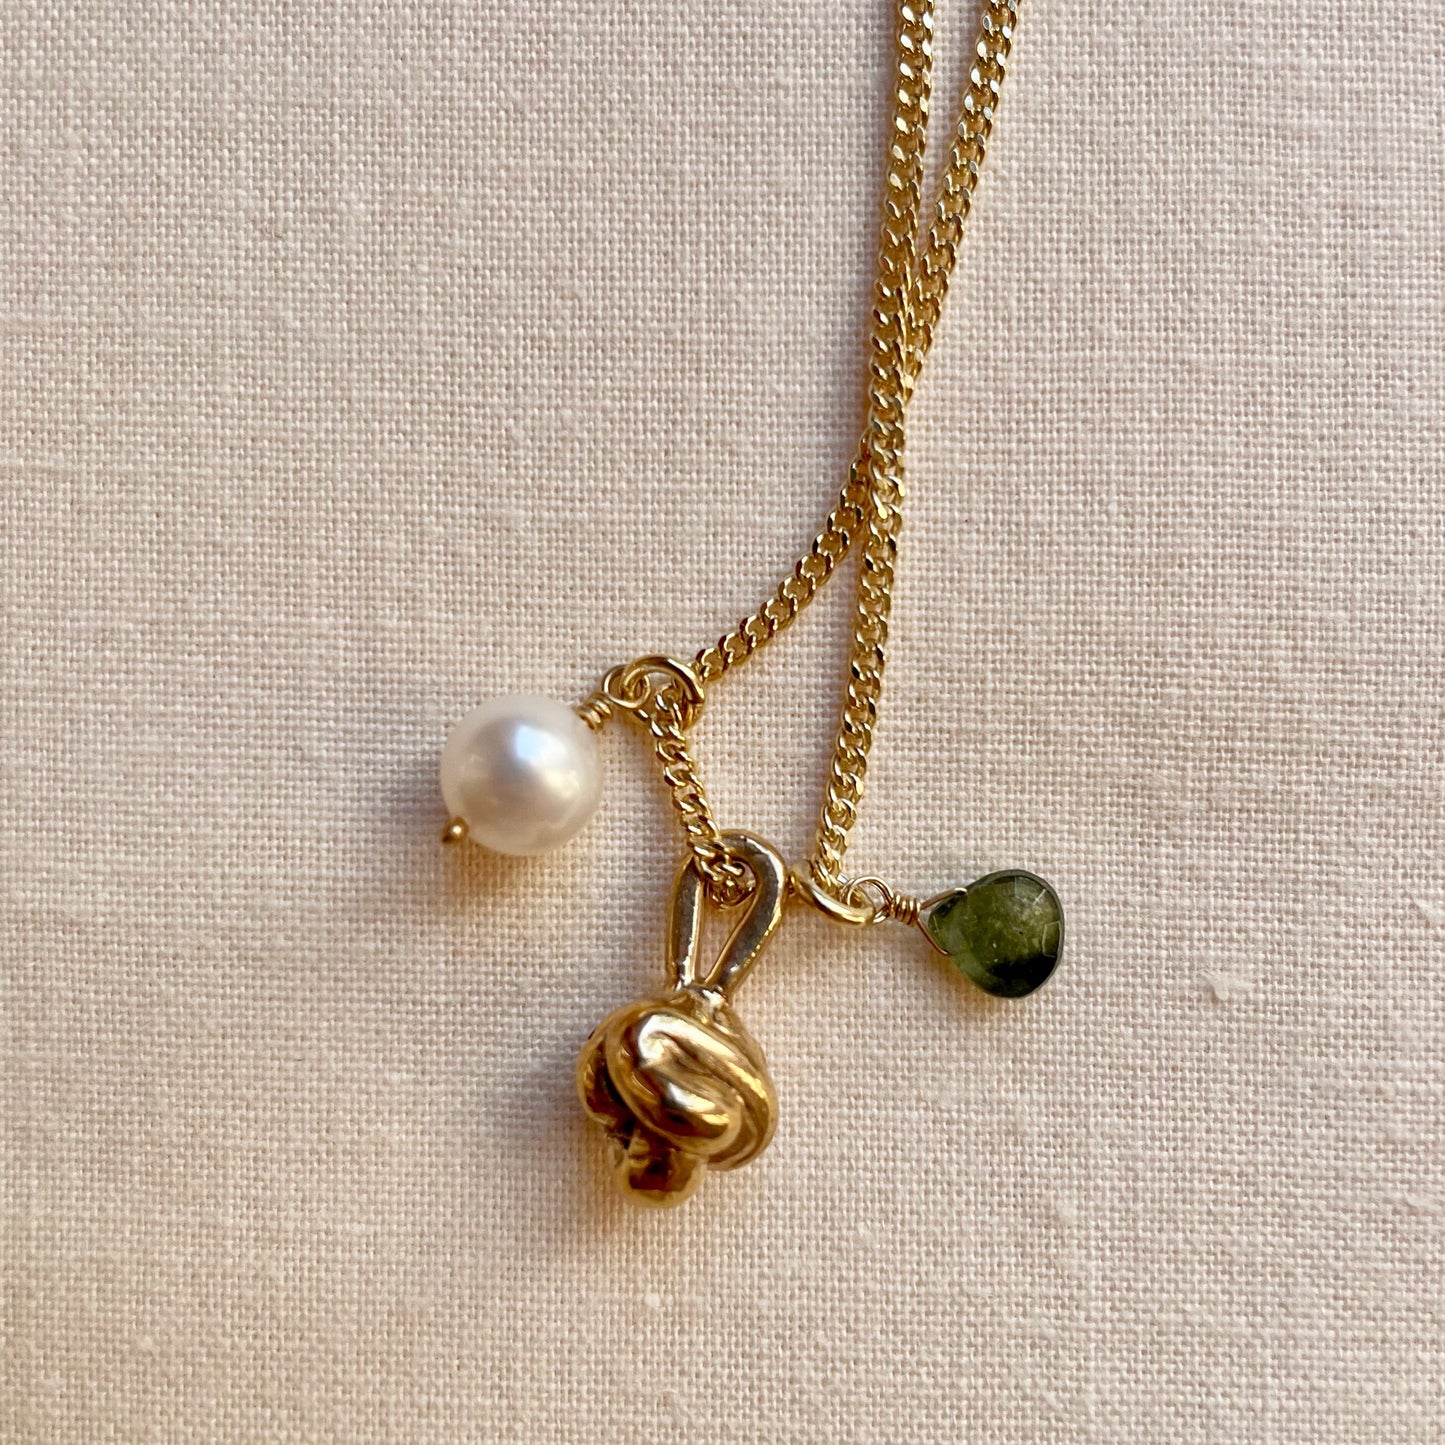 Be Free Necklace. Bronze knot, Pearl and Green Tourmaline Briolette